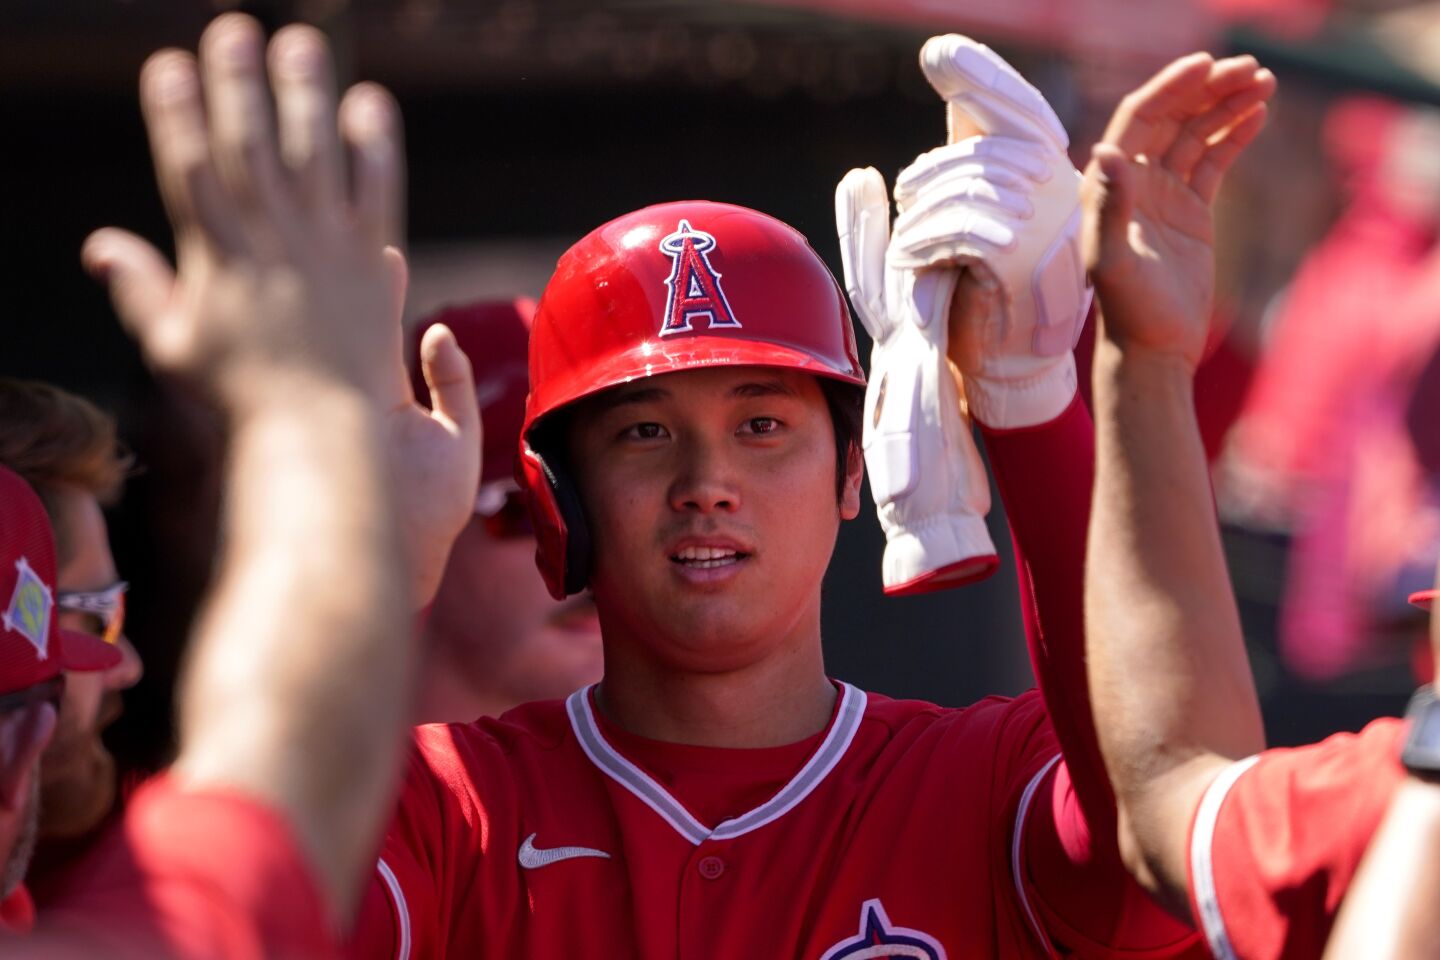 13 | Los Angeles Angels (77-85, 4th in AL West)Shohei Ohtani, who has declined to address whether he’s been offered a contract extension, shouldn’t be in any hurry to set roots down in Anaheim. The Angels haven’t been able to put together a winner in the Mike Trout era and it would be a shame to see two of the game’s preeminent talents continuously held out of the postseason.